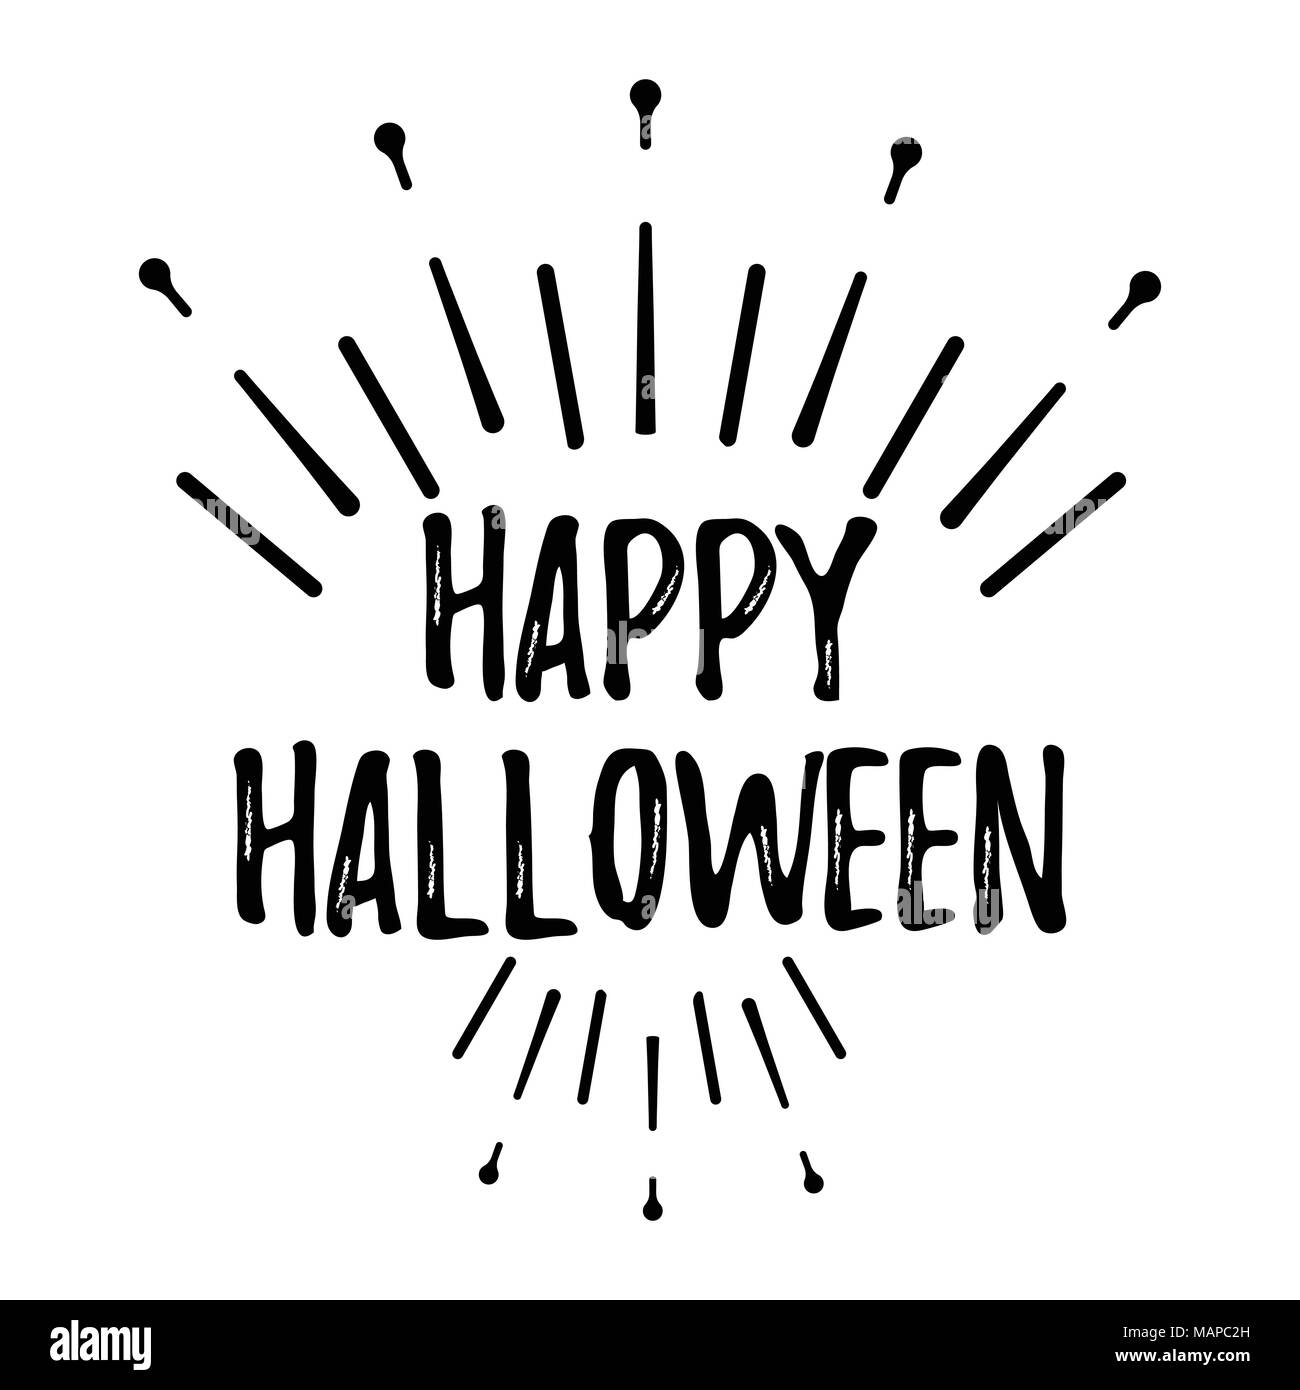 Happy Halloween Greeting Card with Calligraphic Text. Halloween Poster and Banner on White Background. Vector illustration. Stock Vector